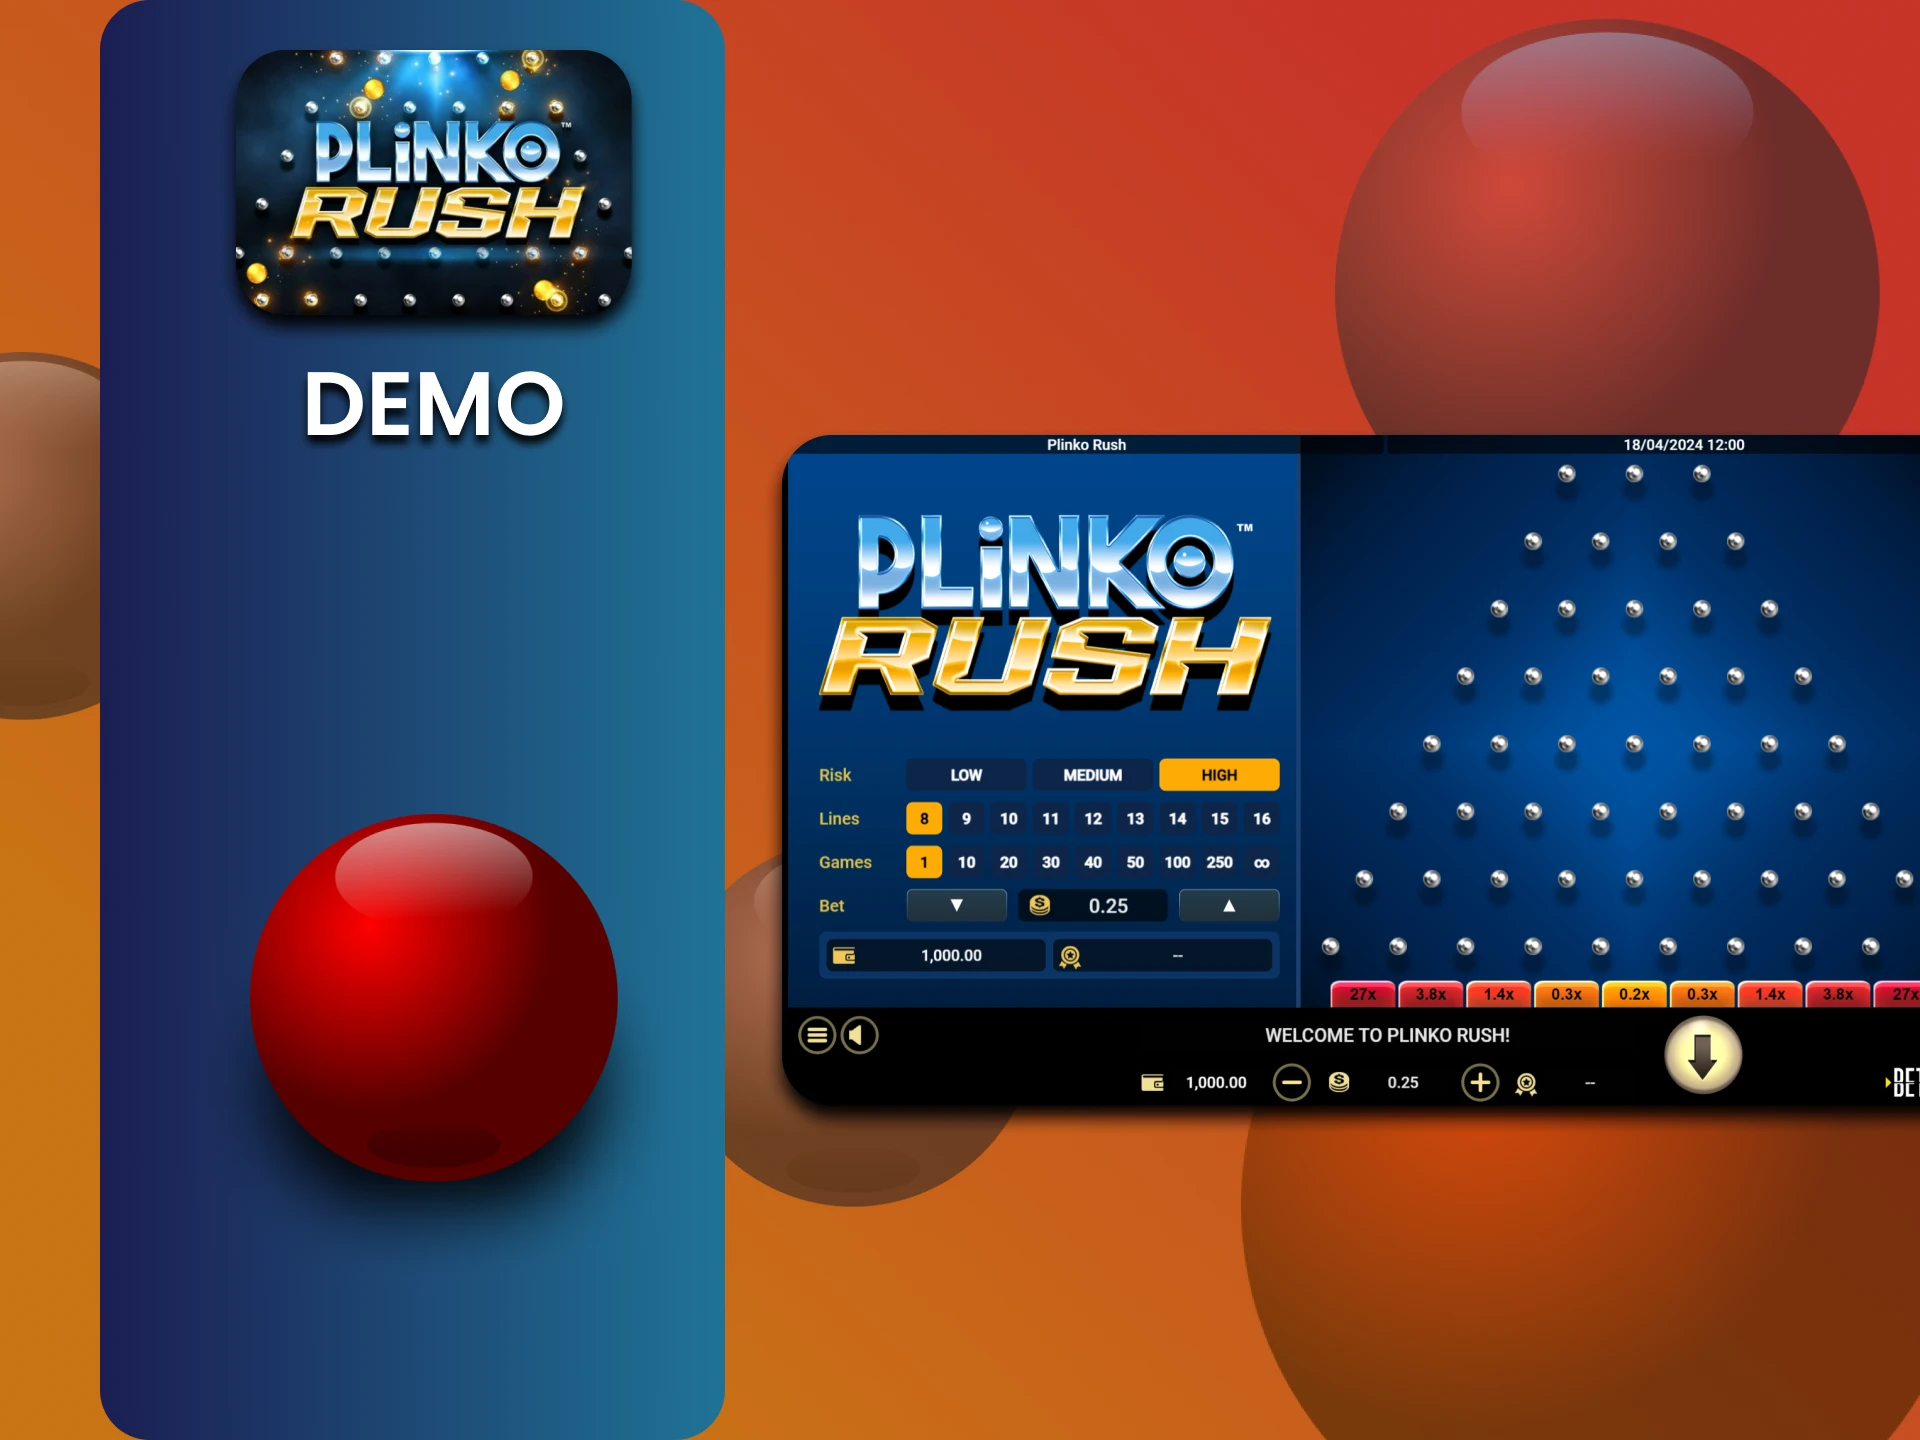 For training, there is a demo version of the game Plinko Rush.